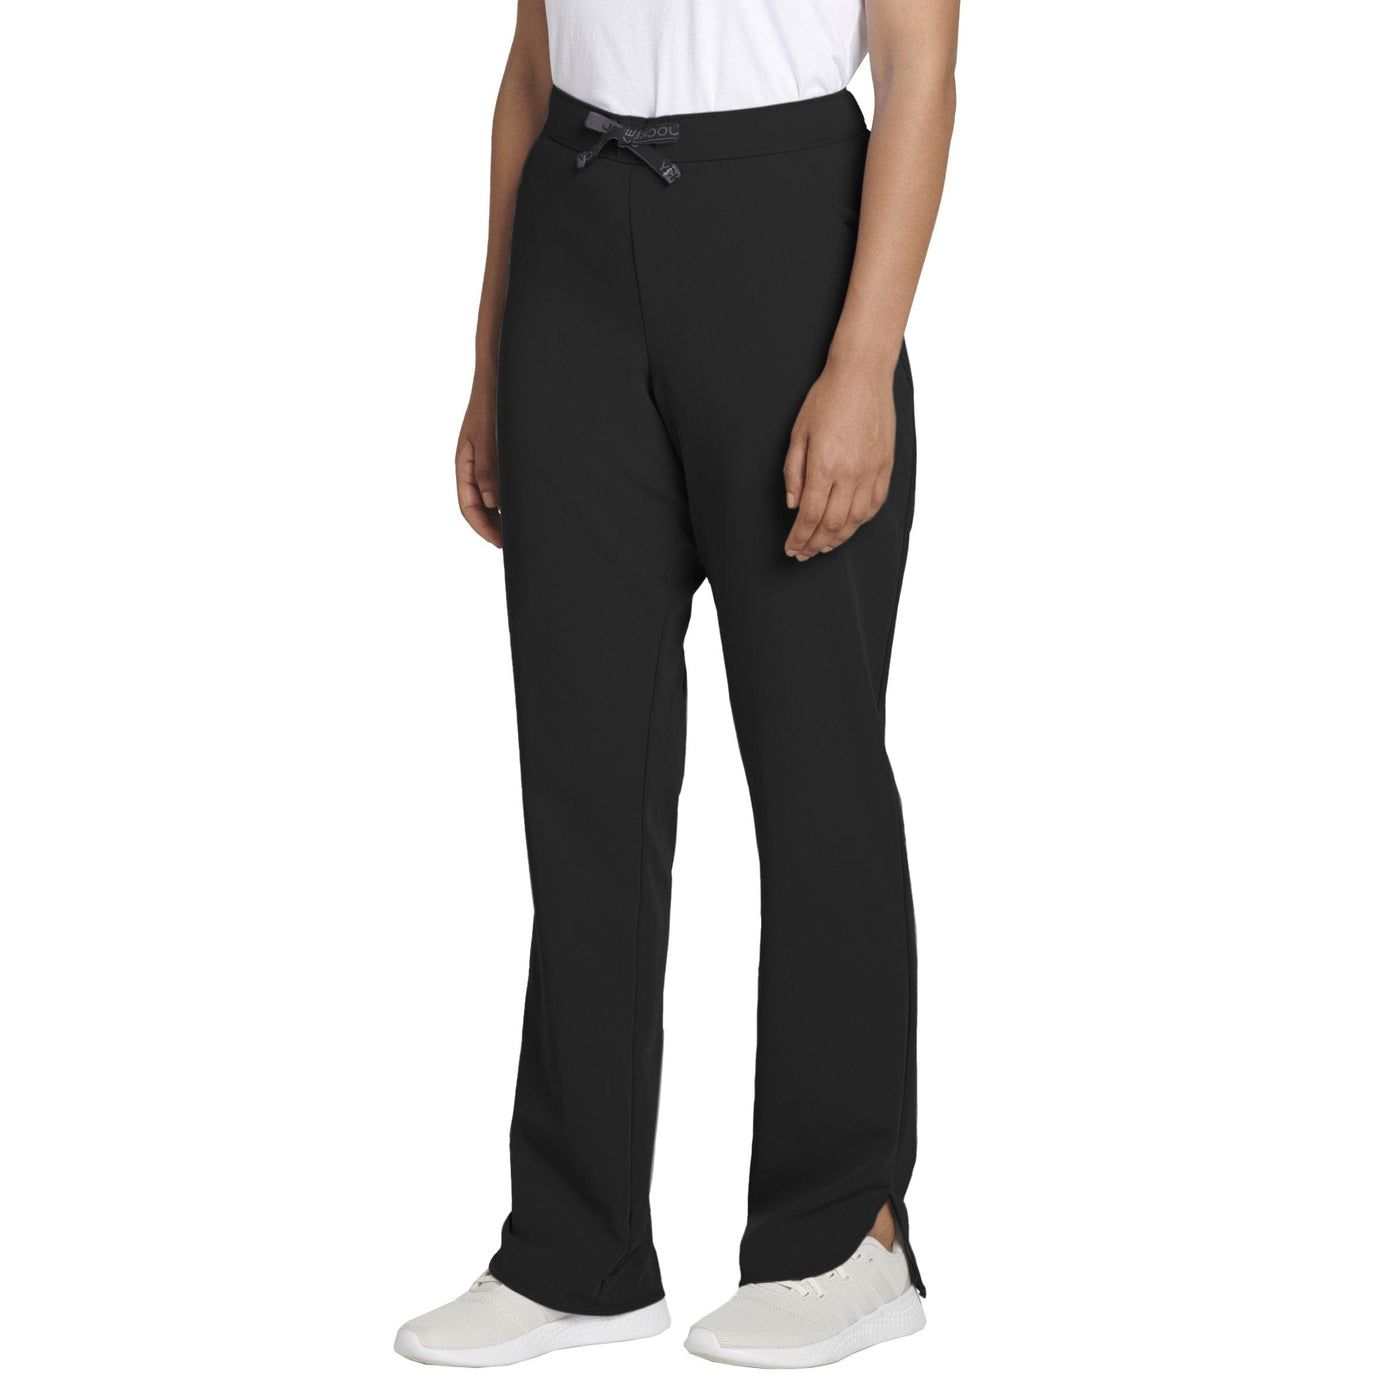 Jockey Ladies Petal Tapered Pant Style: 2484 - Sophisticated Scrub Boutique